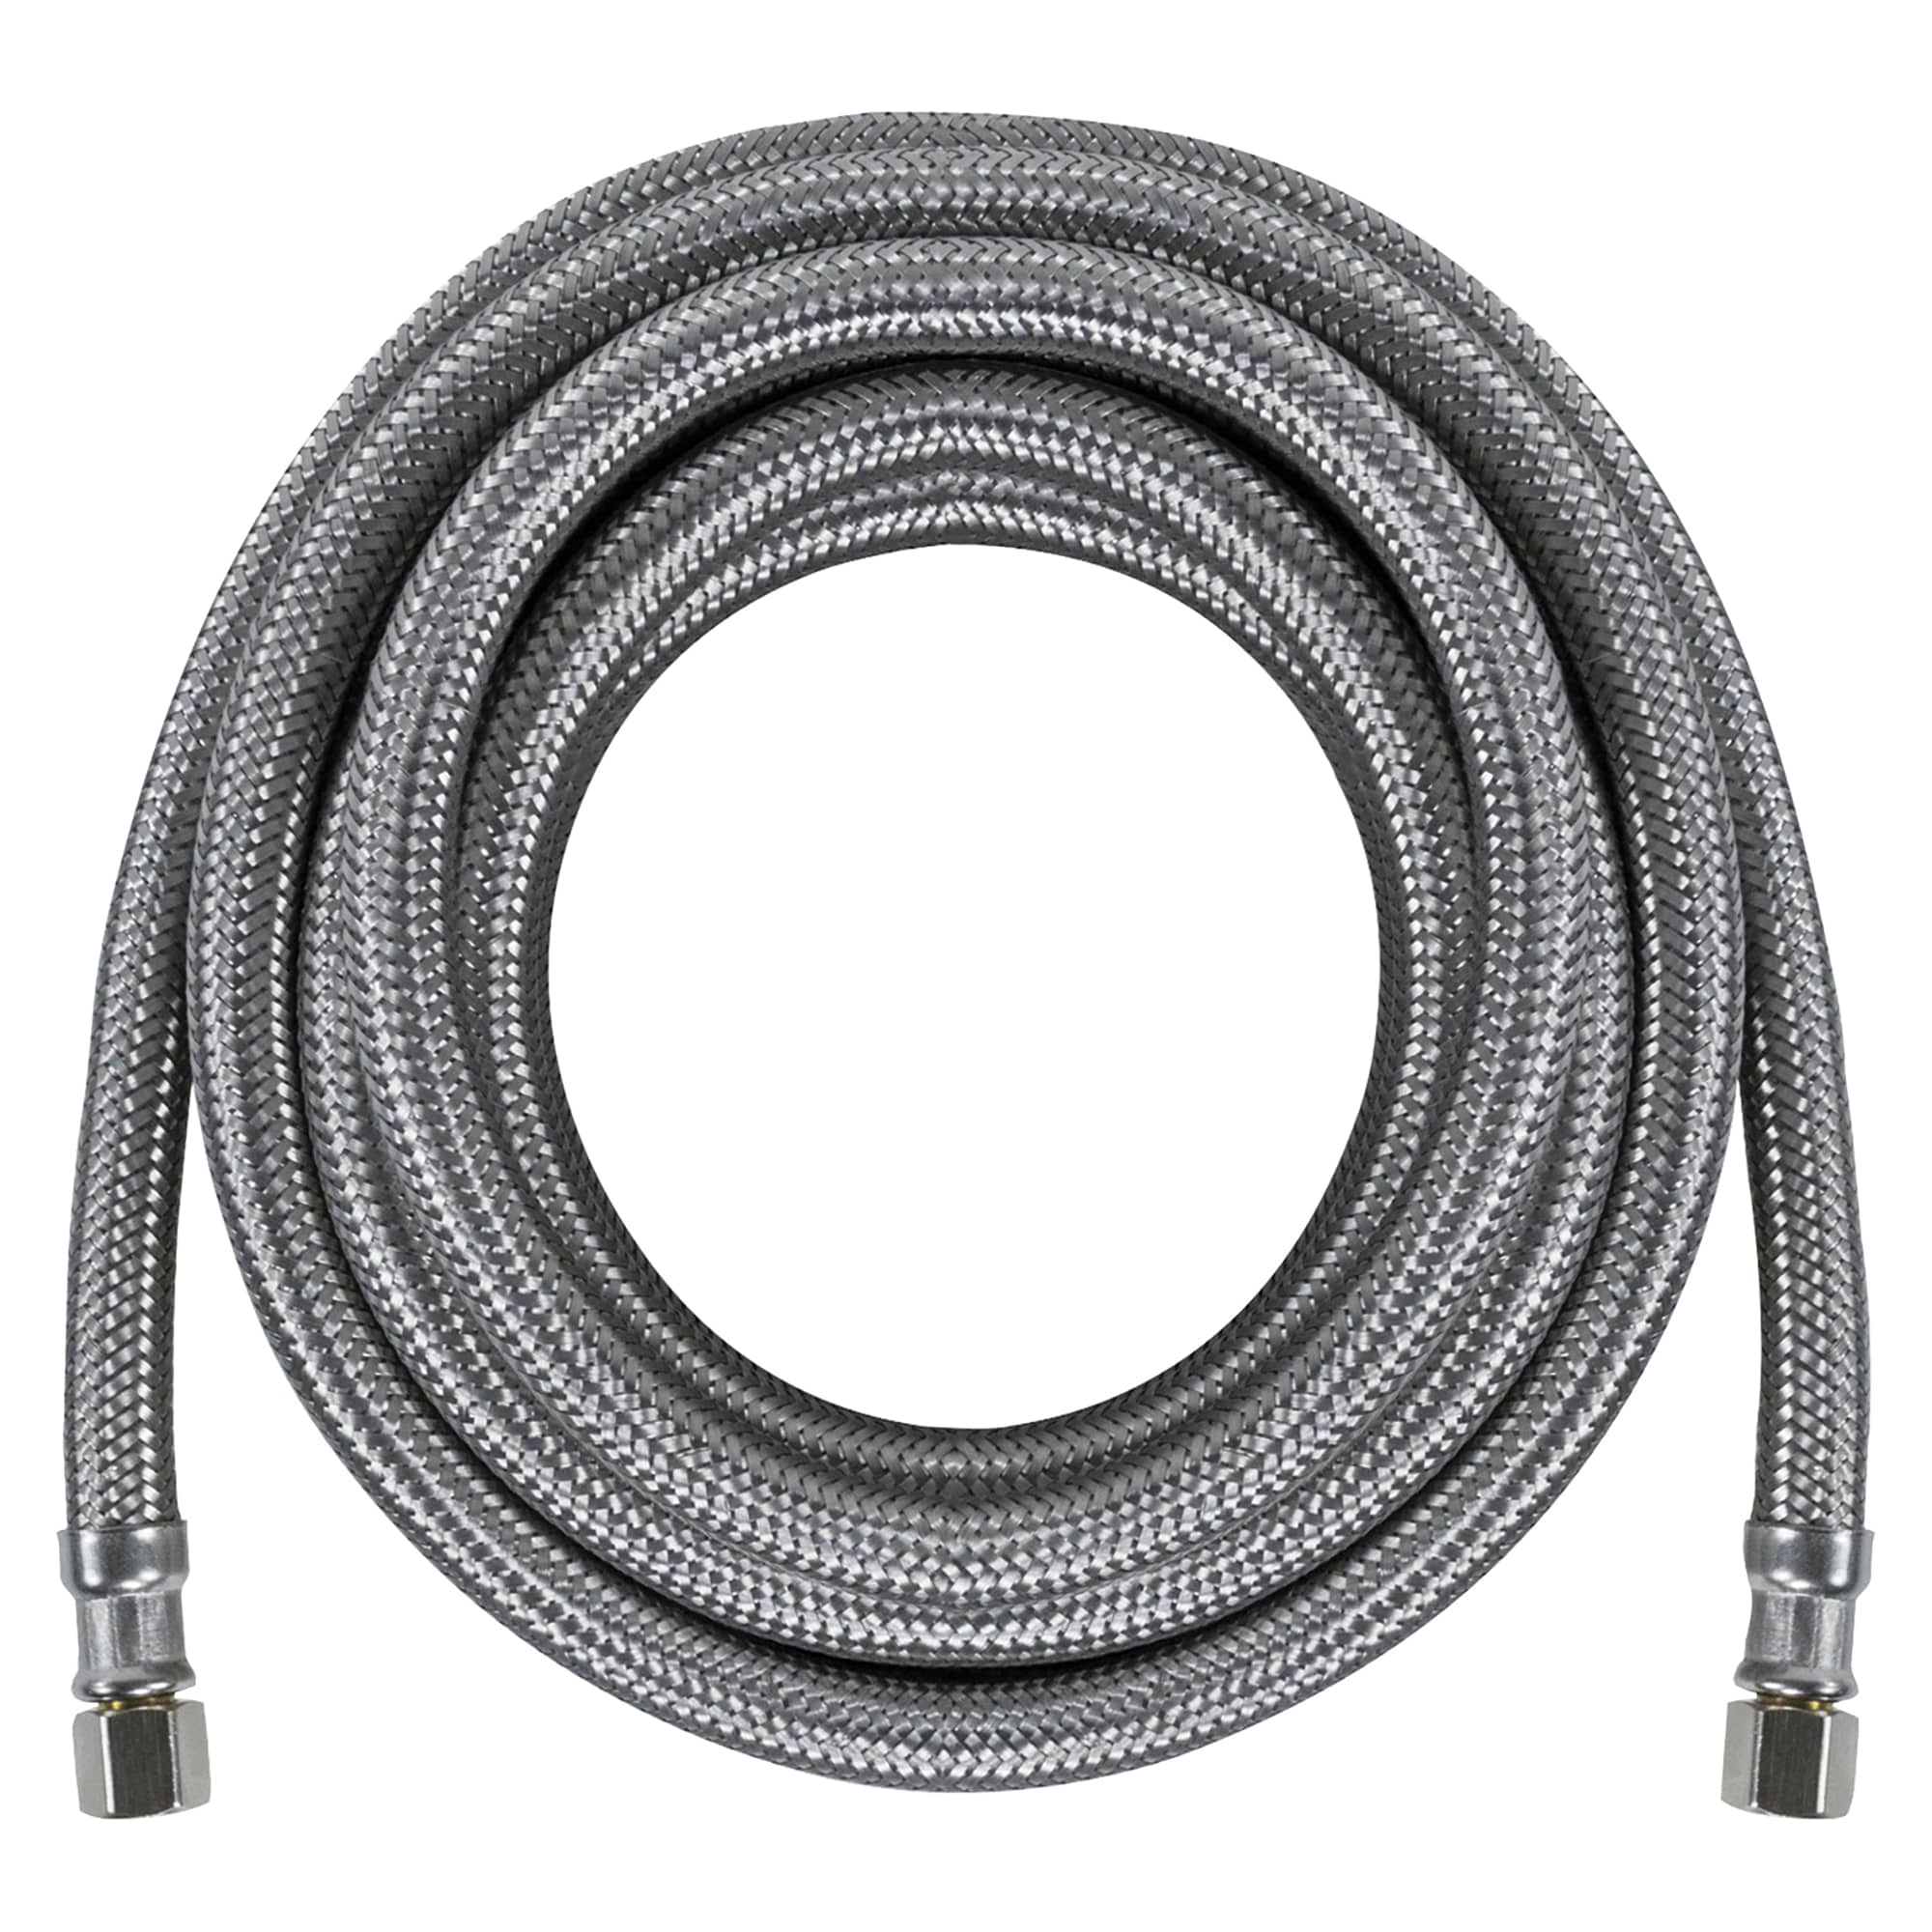 Refrigerator Water Line Kit for Ice Maker Braided - 18' Pex Water Supply  Lines Hose for Fridge Outlet Box with 1/4 Comp Fitting and 3/8 to 1/4 Water